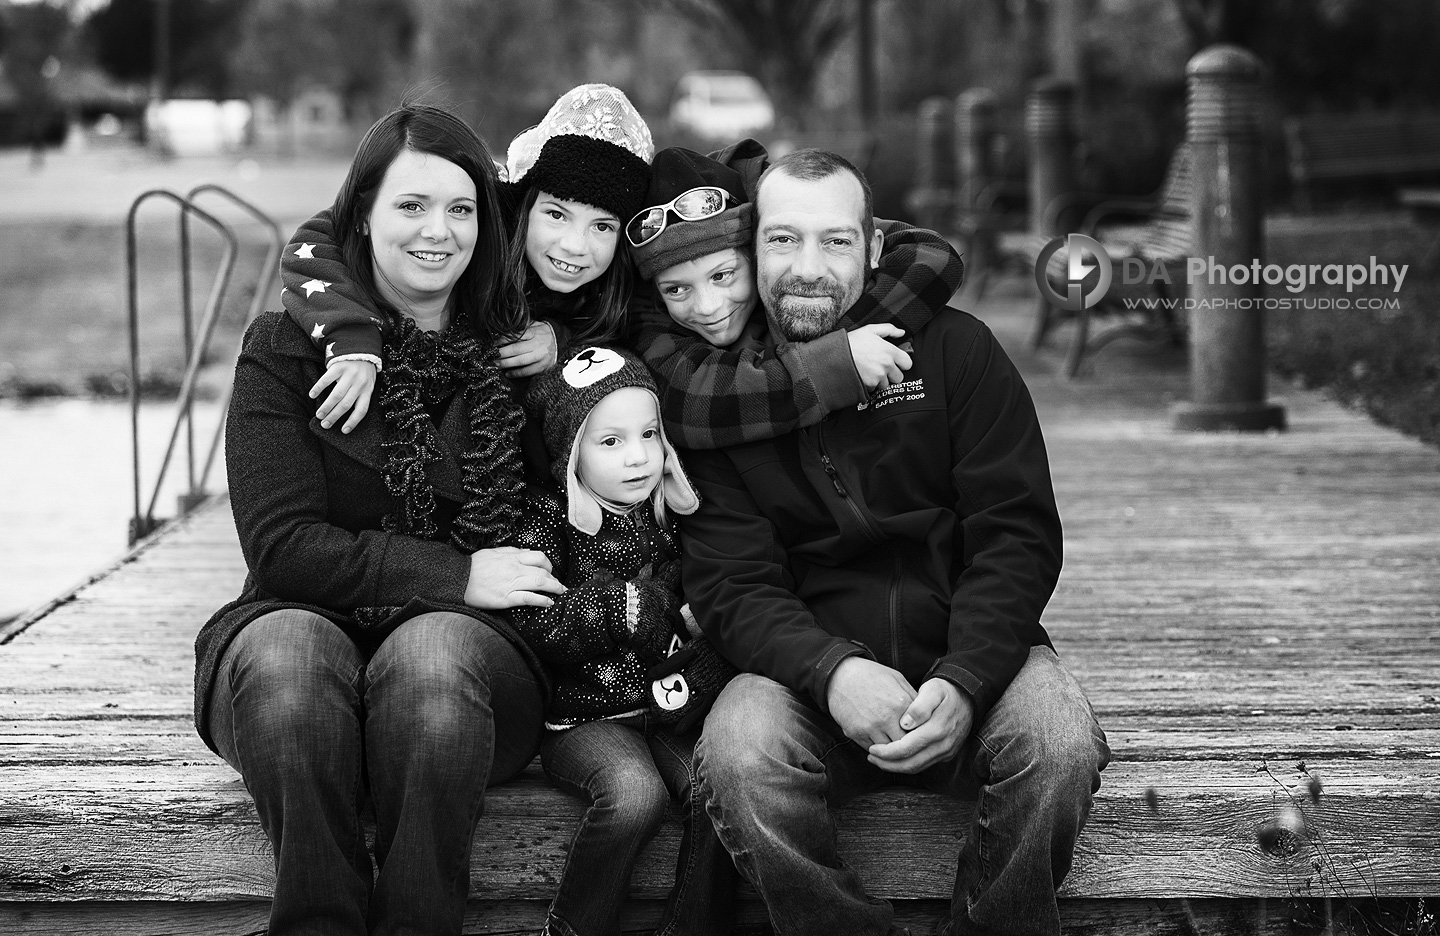 Keeping Warm and Happy - Family Photography by DA Photography